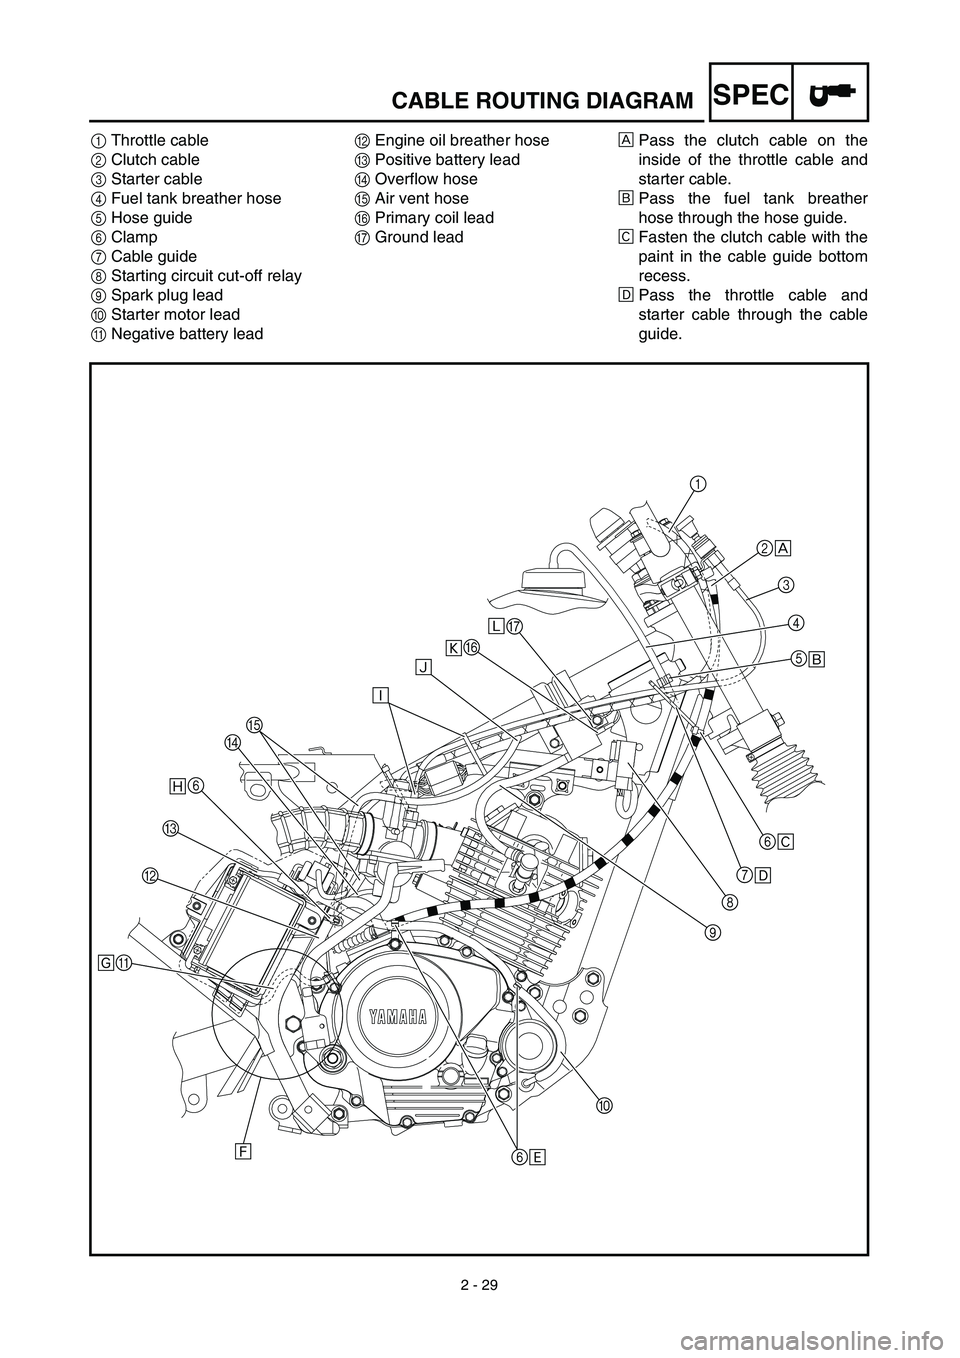 YAMAHA TTR125 2003  Owners Manual 2 - 29
SPEC
1Throttle cable
2Clutch cable
3Starter cable
4Fuel tank breather hose
5Hose guide
6Clamp
7Cable guide
8Starting circuit cut-off relay
9Spark plug lead
0Starter motor lead
ANegative battery